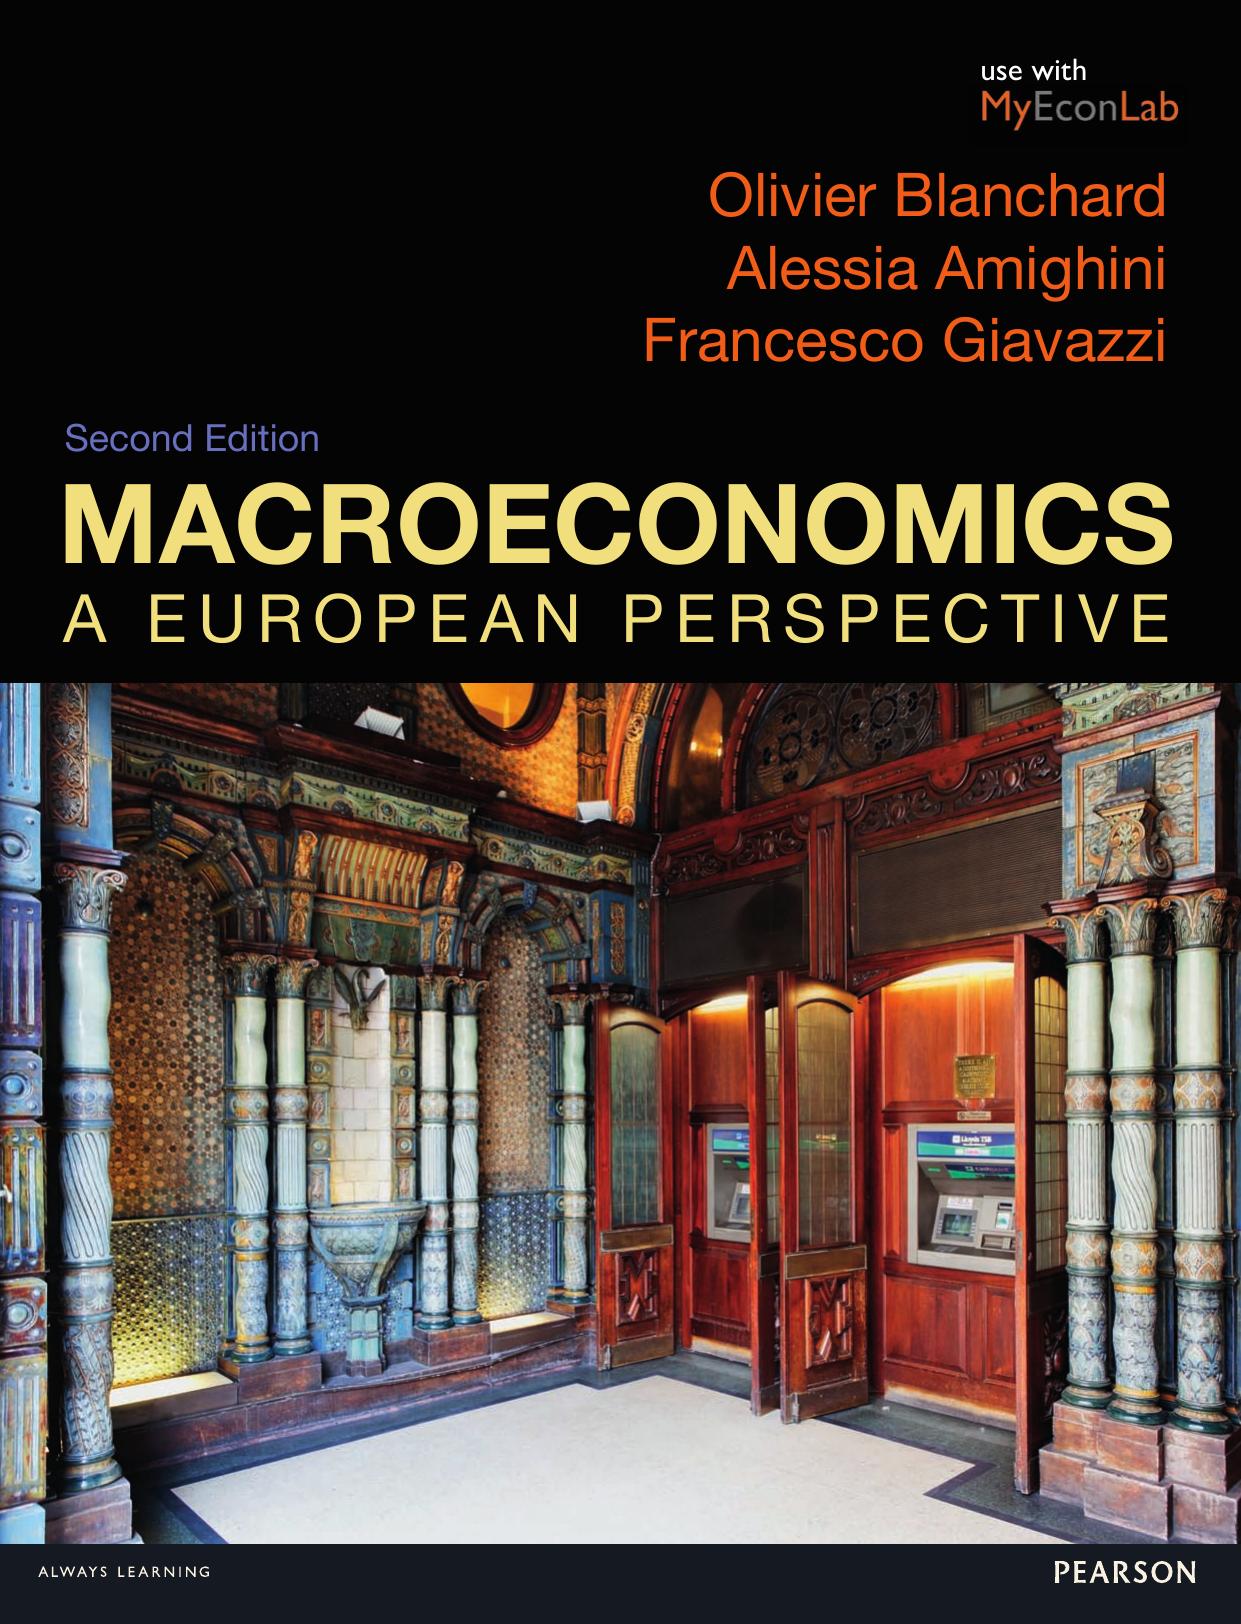 Macroeconomics, 7th Edition by Olivier BlanchardTextbooks Solutions Manual and Test Bank